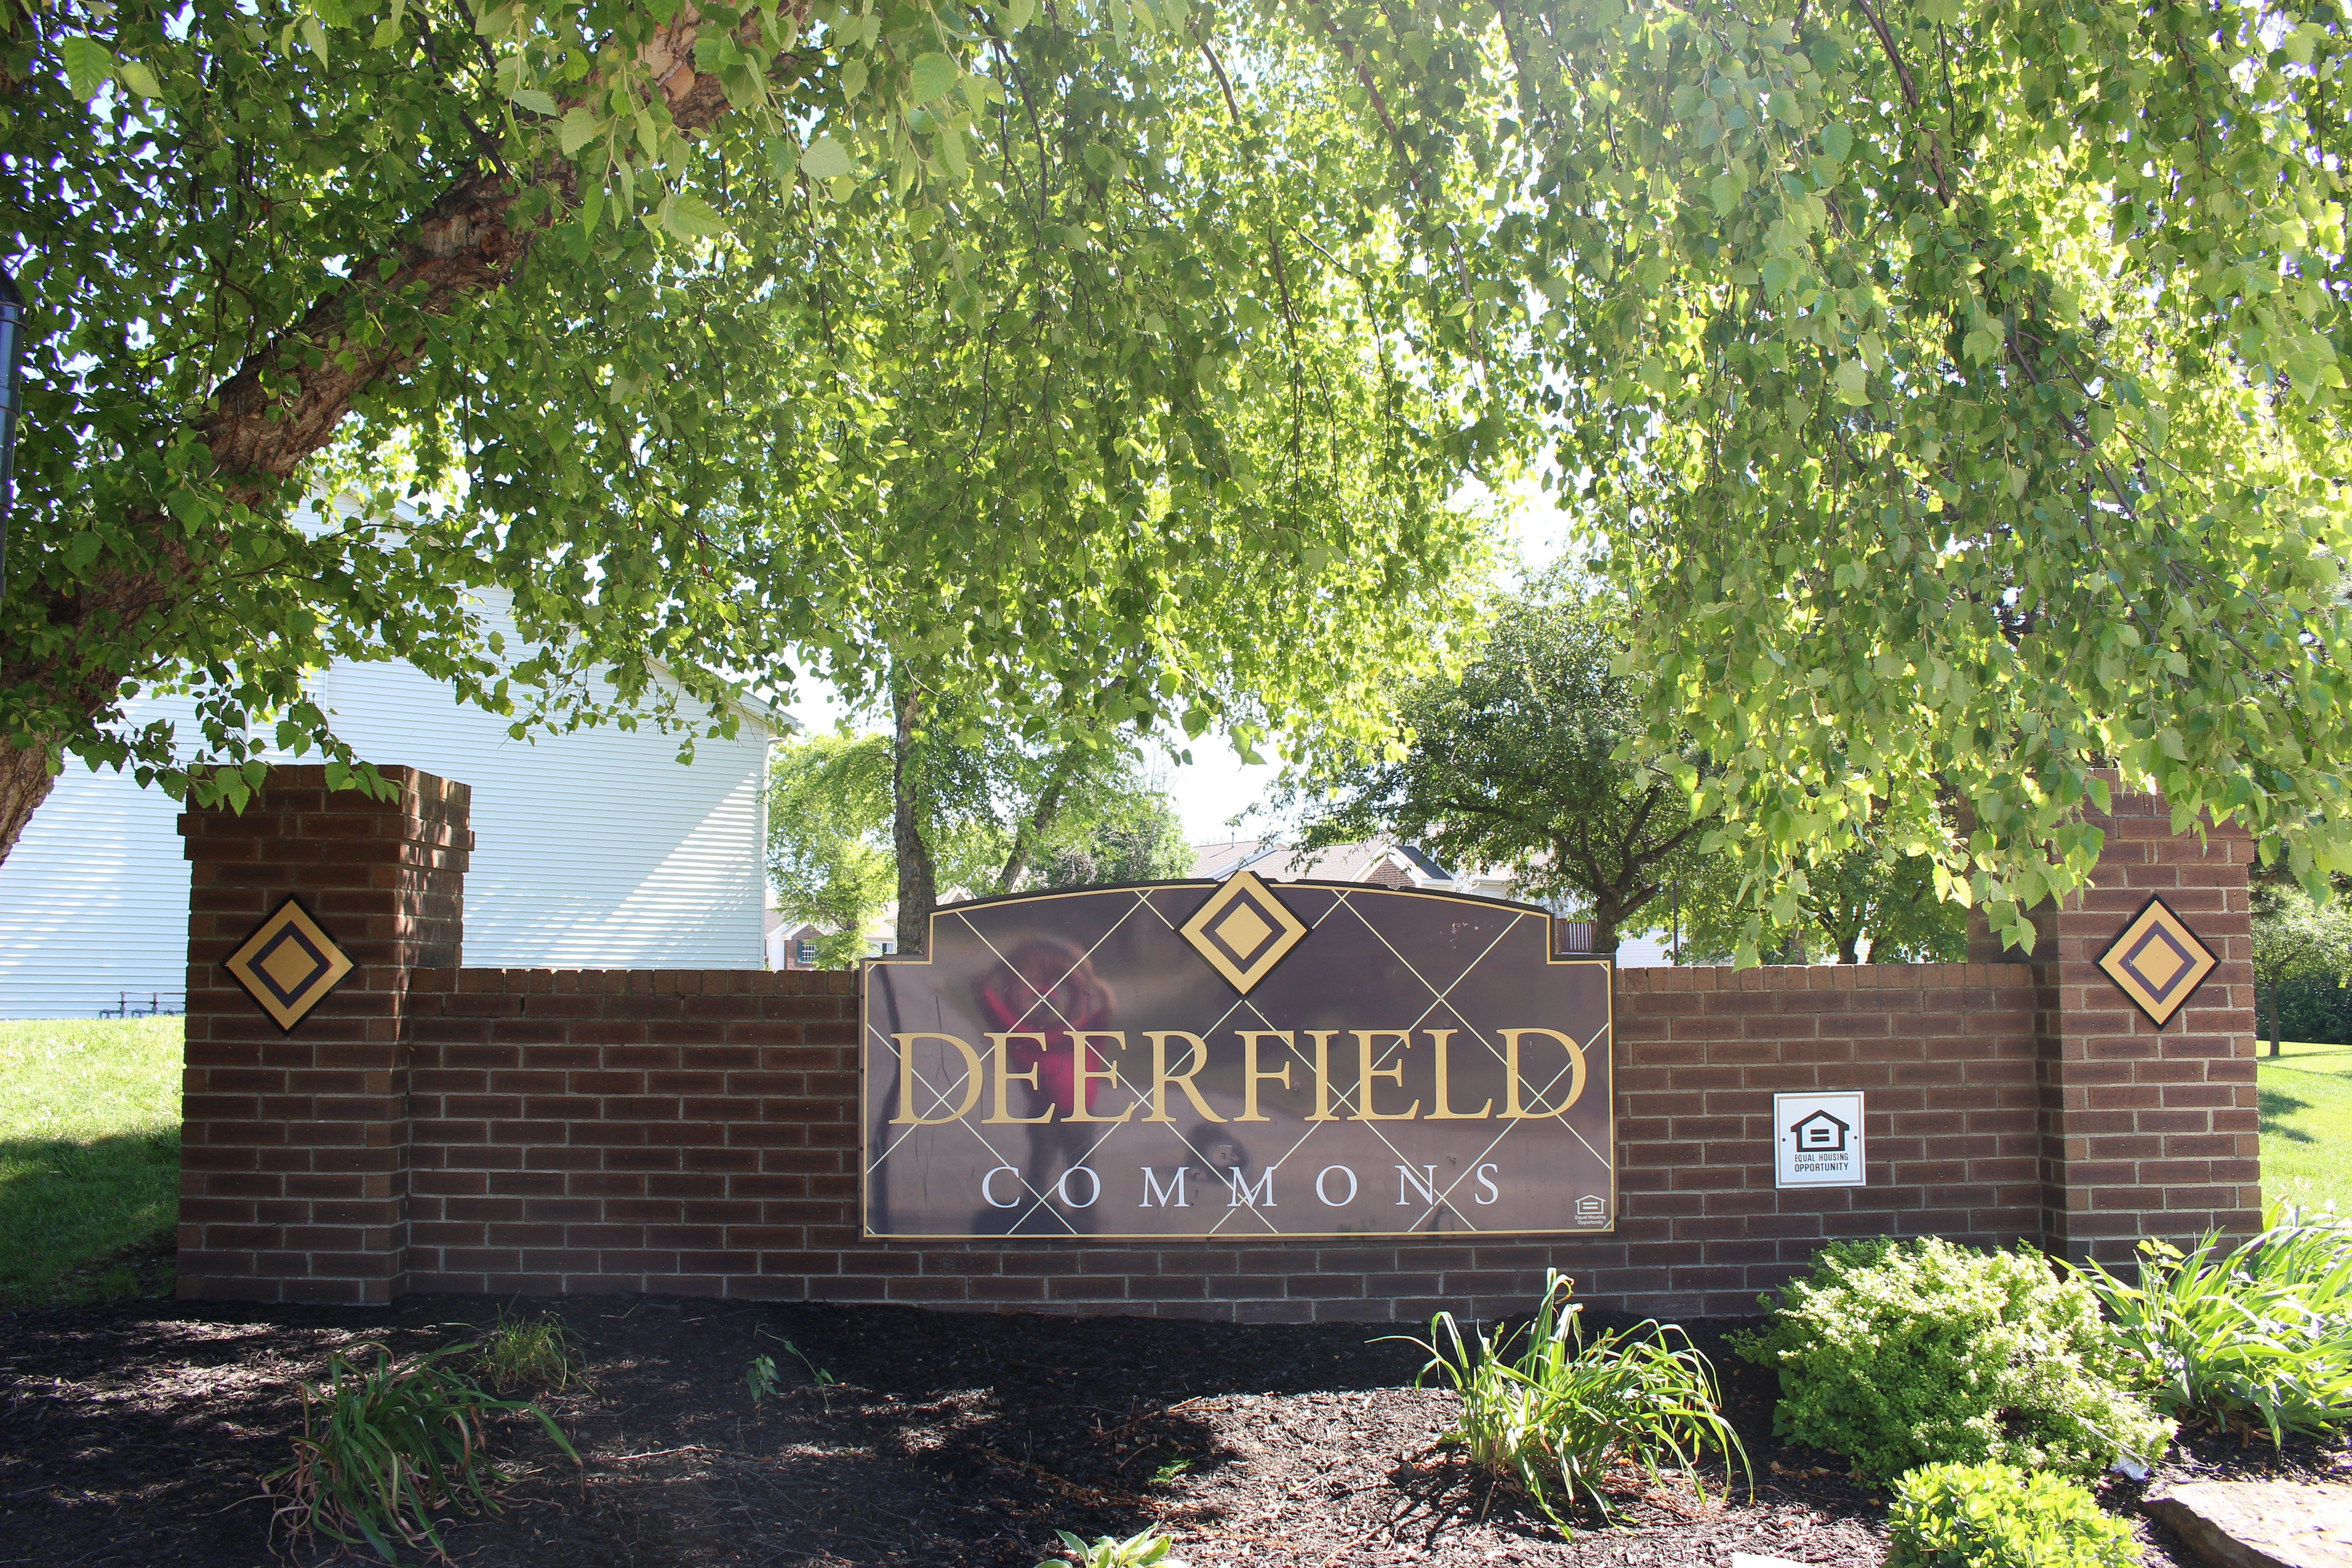 Deerfield Commons Apartments for Families